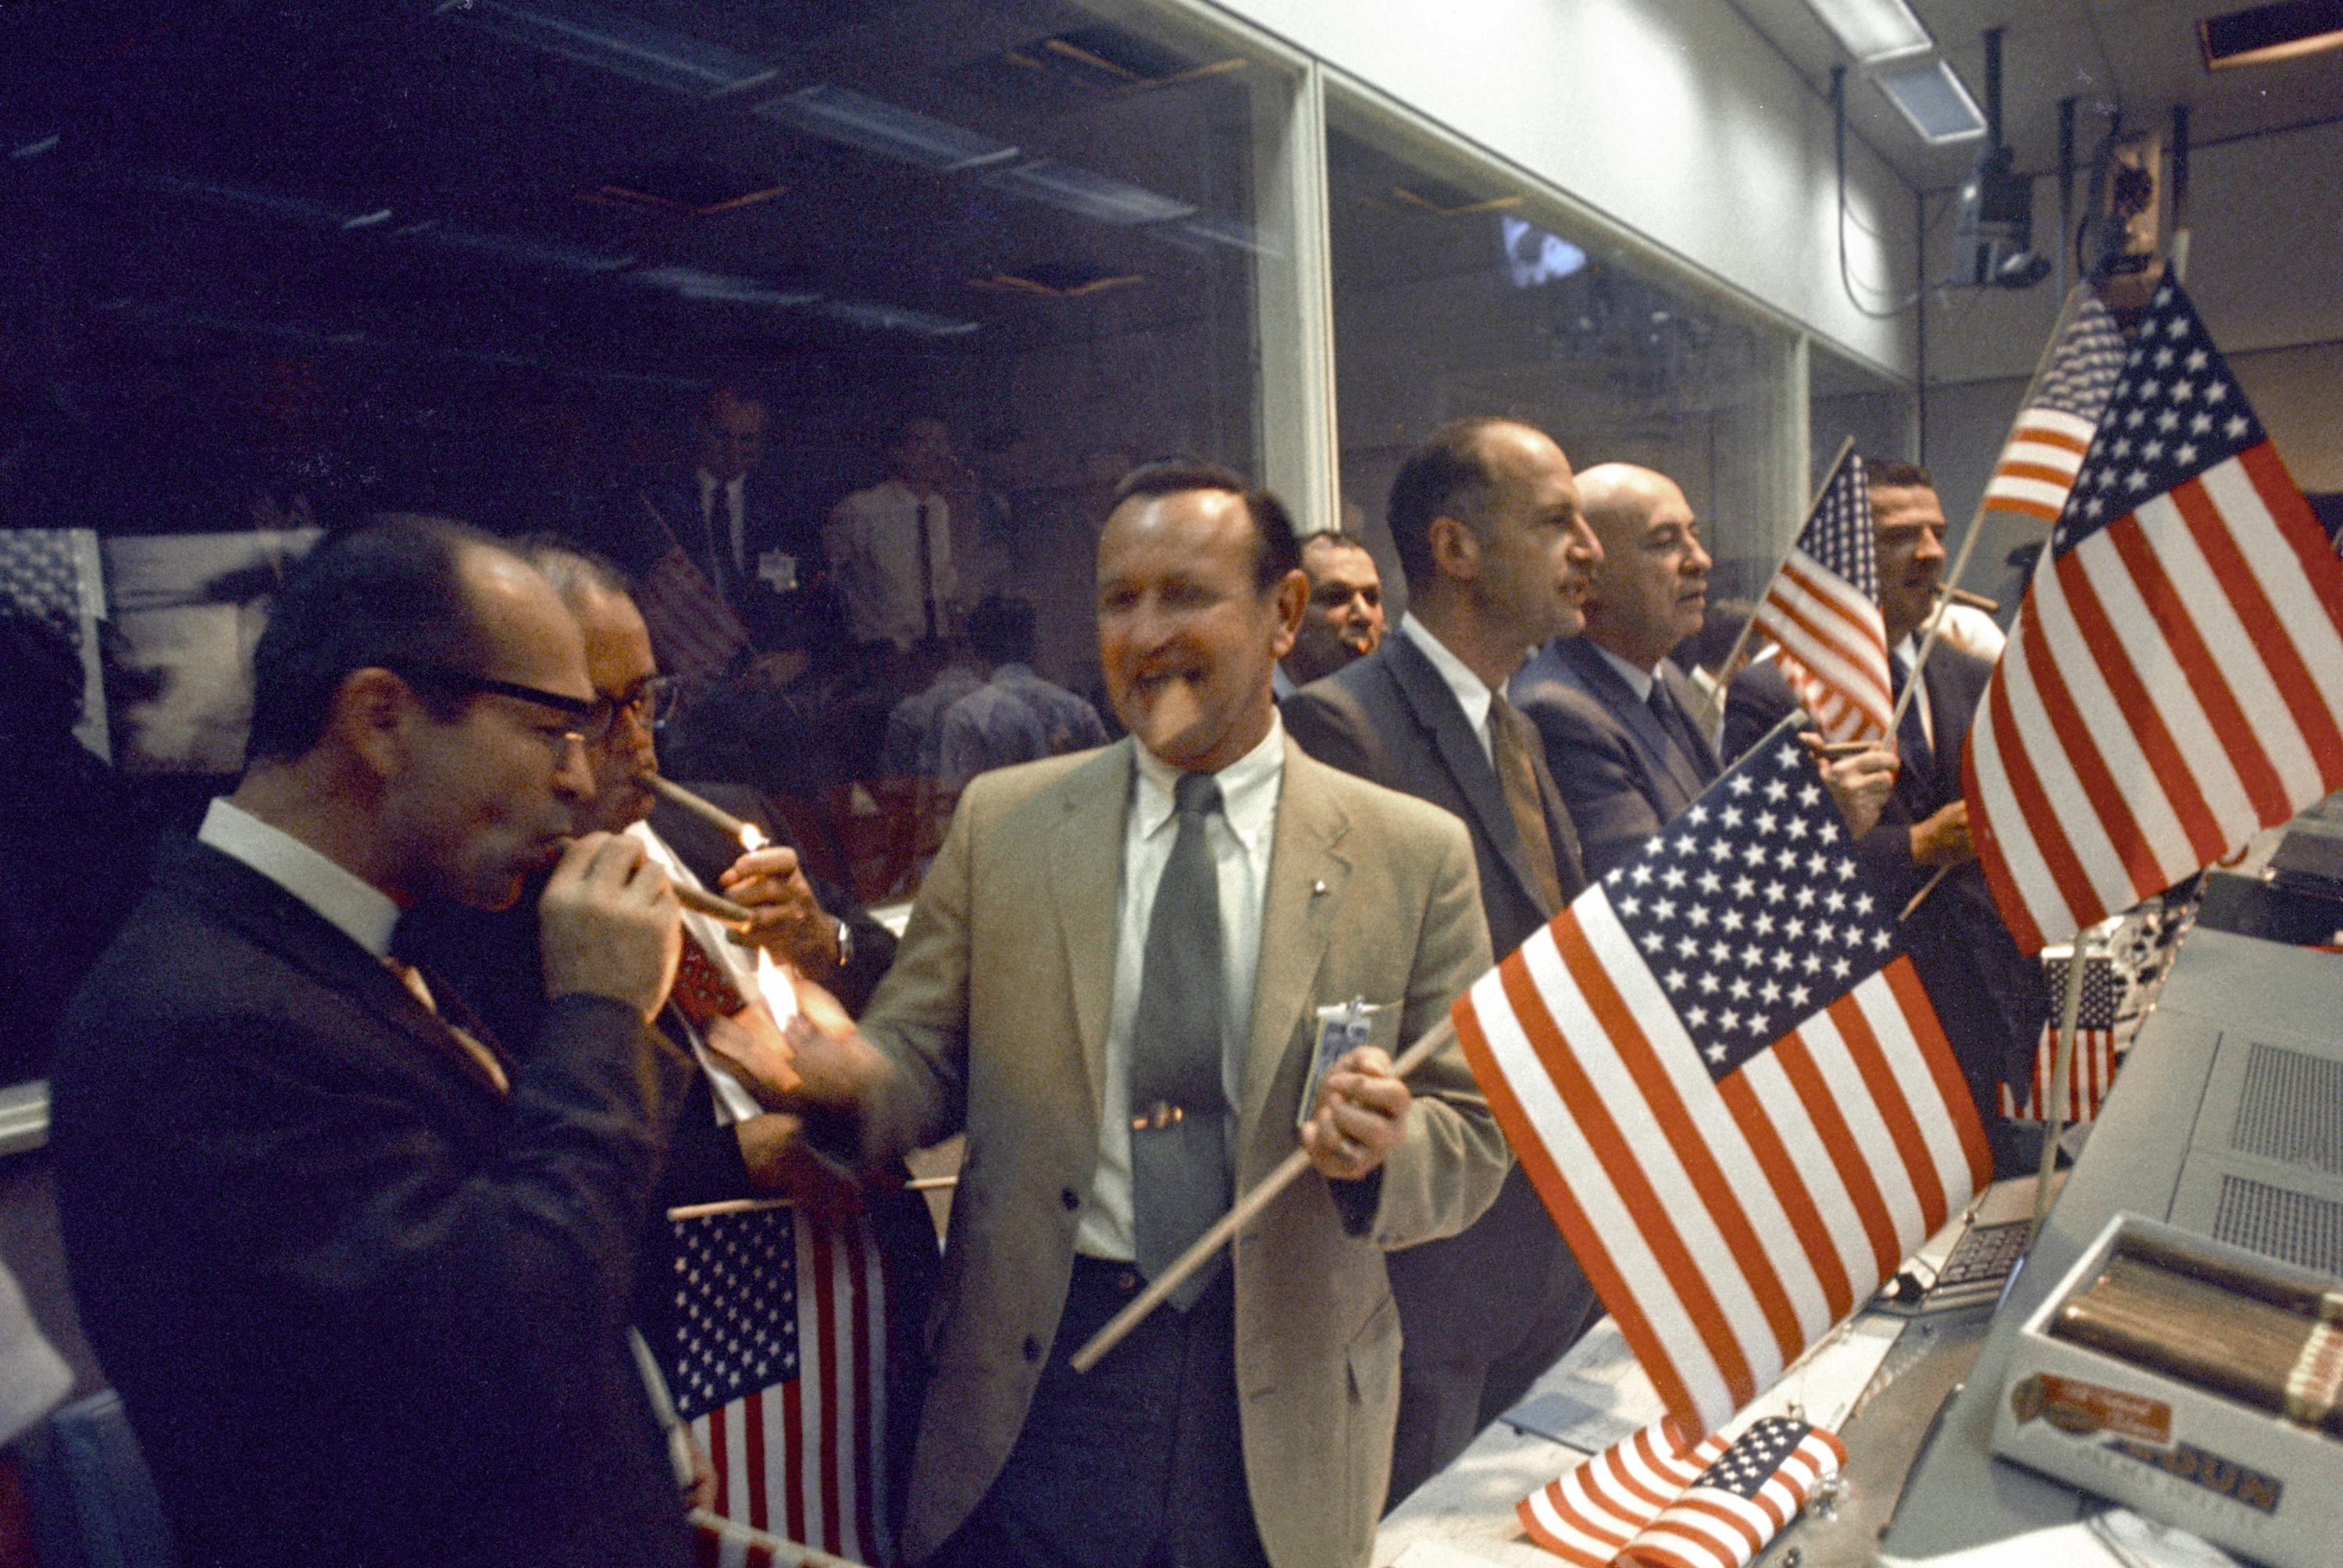 Jubilant NASA personnel  celebrate the Apollo 11 mission accomplishment with traditional cigar smoking at the Mission Control Center in Houston on July 24, 1969.